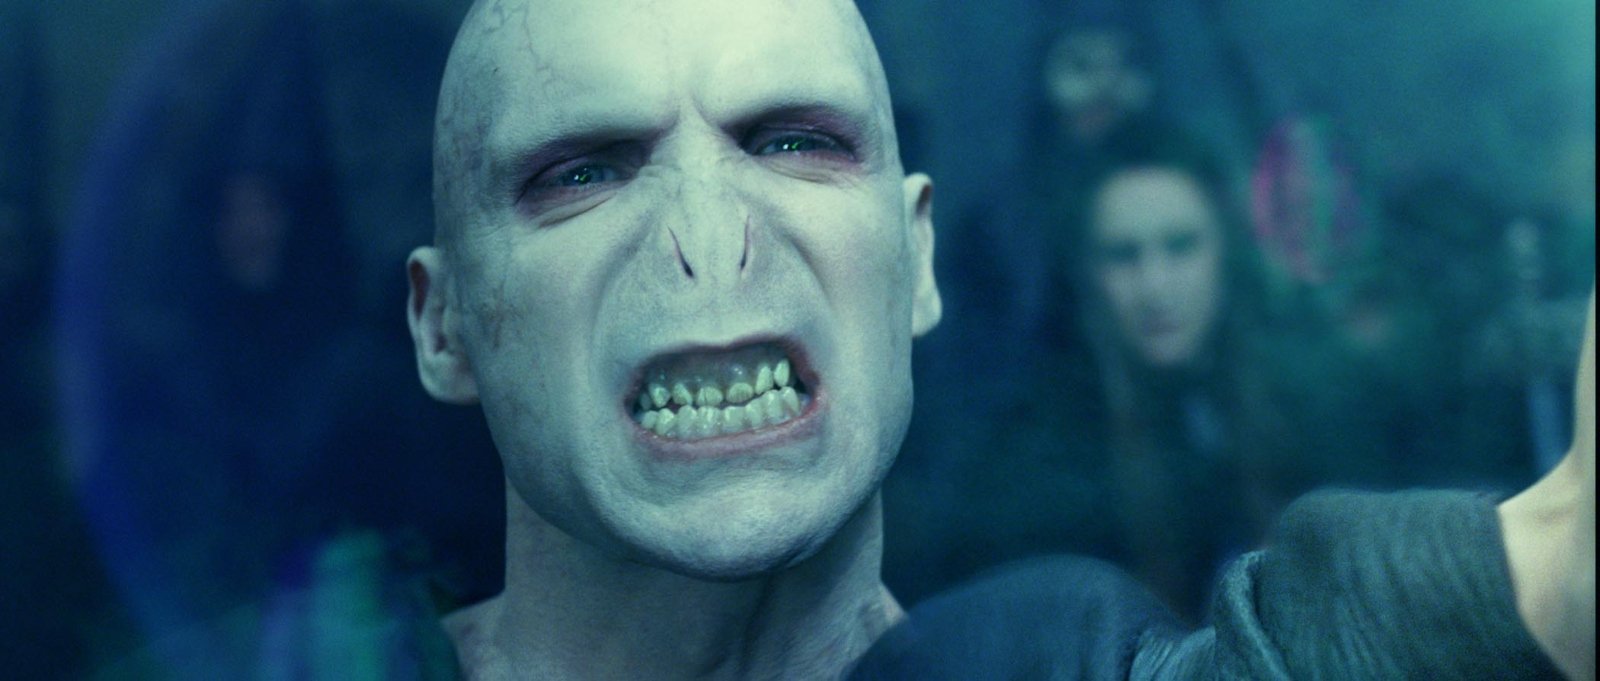 Harry Potter': Voldemort's Makeup Was With a Basic Ingredient